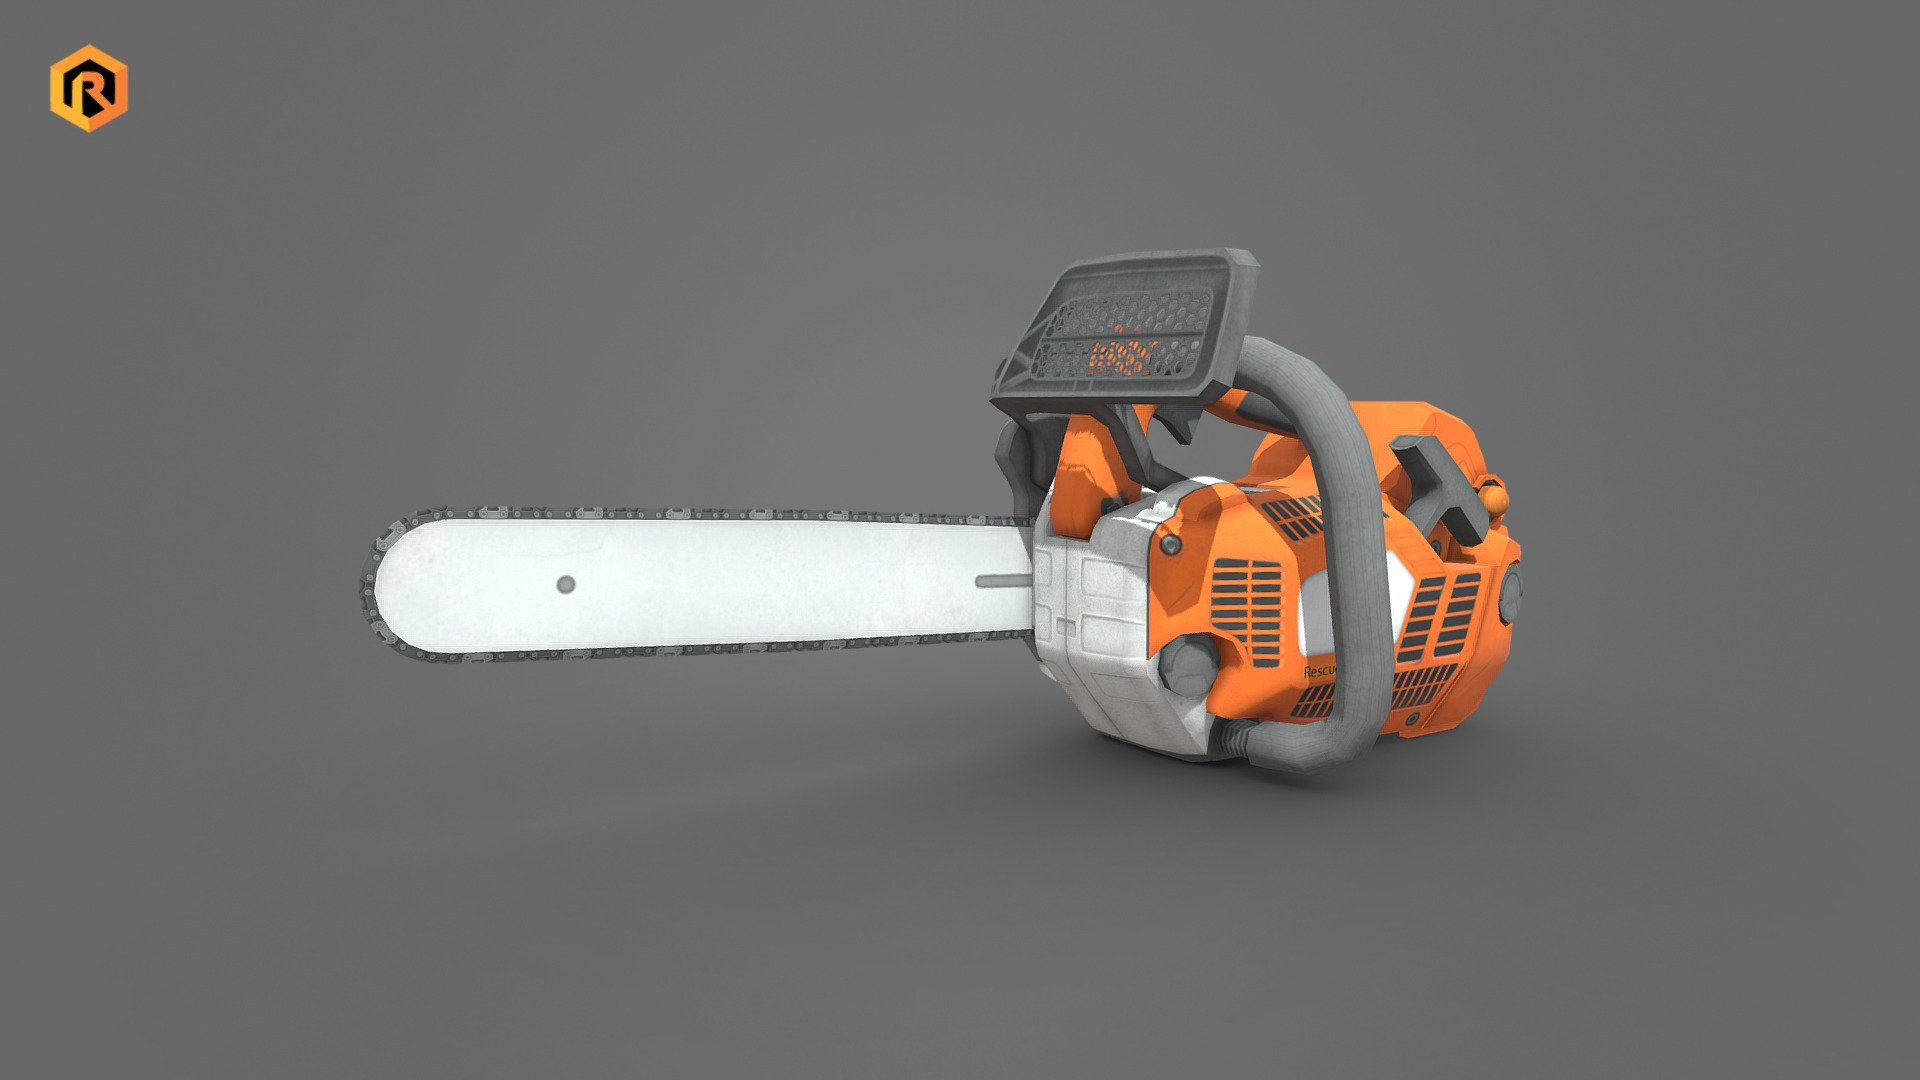 Low-poly 3D model of a Petrol Chainsaw.

It is best for use in games and other VR / AR, real-time applications such as Unity or Unreal Engine.

It can also be rendered in Blender (ex Cycles) or Vray as the model is equipped with all required PBR textures.  

**You can also get this model in these bundles: ** 

https://skfb.ly/otro7 

https://skfb.ly/osCqC 

https://skfb.ly/osRTL    

Technical details:




2048 x 2048 Diffuse and AO textures textures set.

2647 Triangles

2739  Vertices

Model is one mesh.

Pivot point centered at world origin.

Model scaled to approximate real world size (centimeters).

All nodes, materials and textures are appropriately named.

More file formats are available in additional zip file on product page.

Please feel free to contact me if you have any questions or need any support for this asset.

Support e-mail: support@rescue3d.com - Chainsaw - Download Free 3D model by Rescue3D Assets (@rescue3d) 3d model